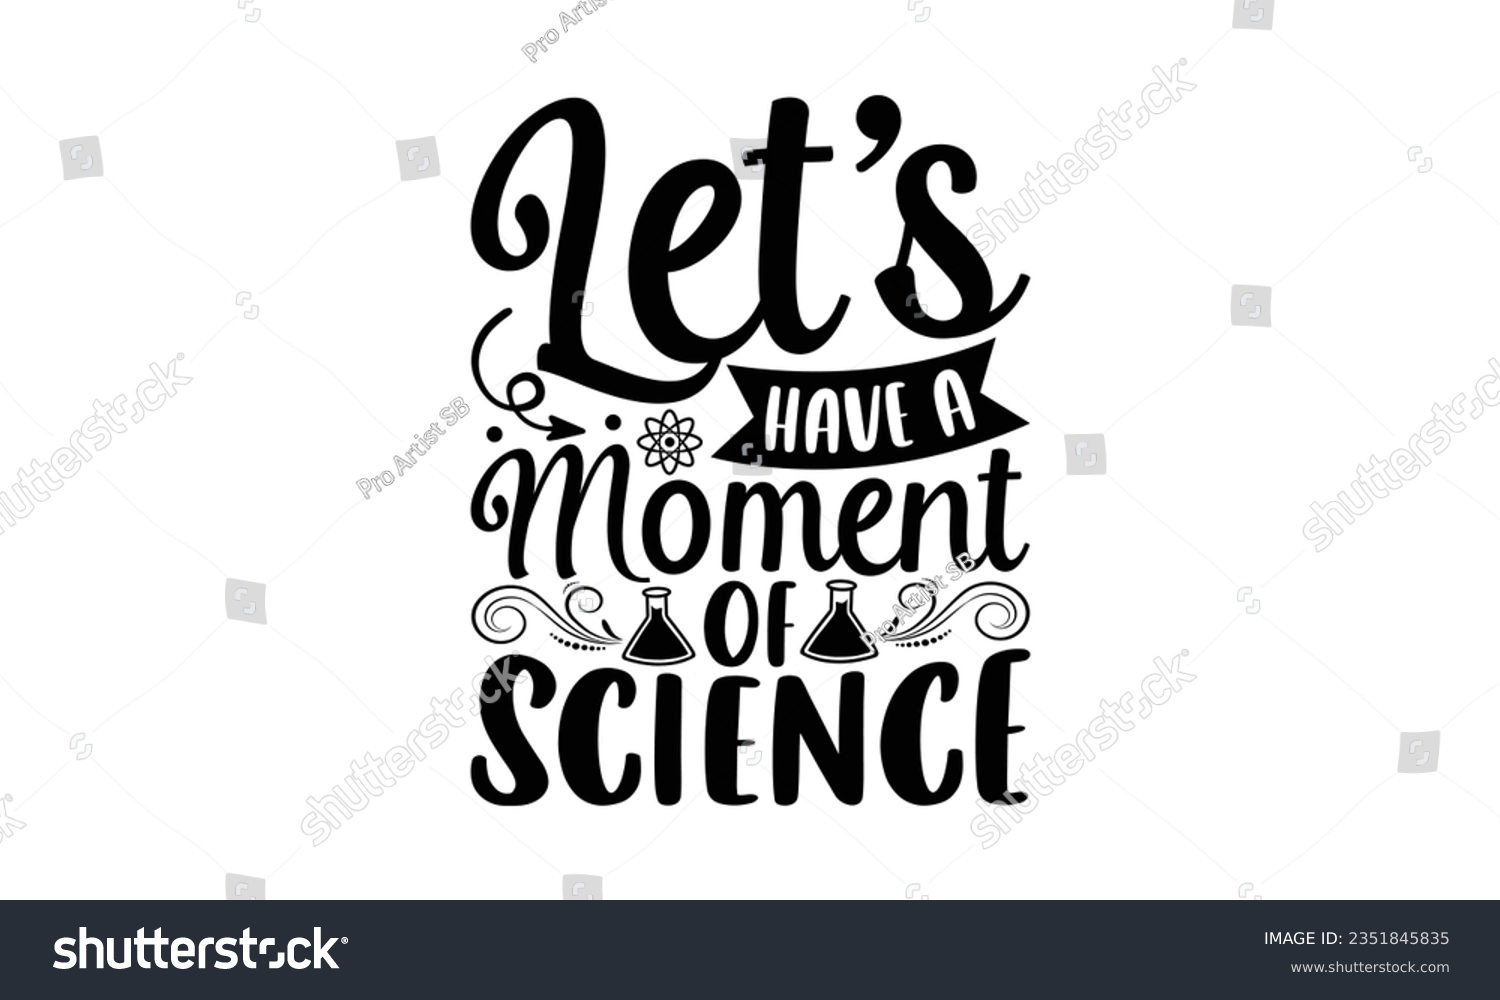 SVG of Let’s have a moment of science - School SVG Design Sublimation, Back to School Quotes, Calligraphy Graphic Design, Typography Poster with Old Style Camera and Quote. svg